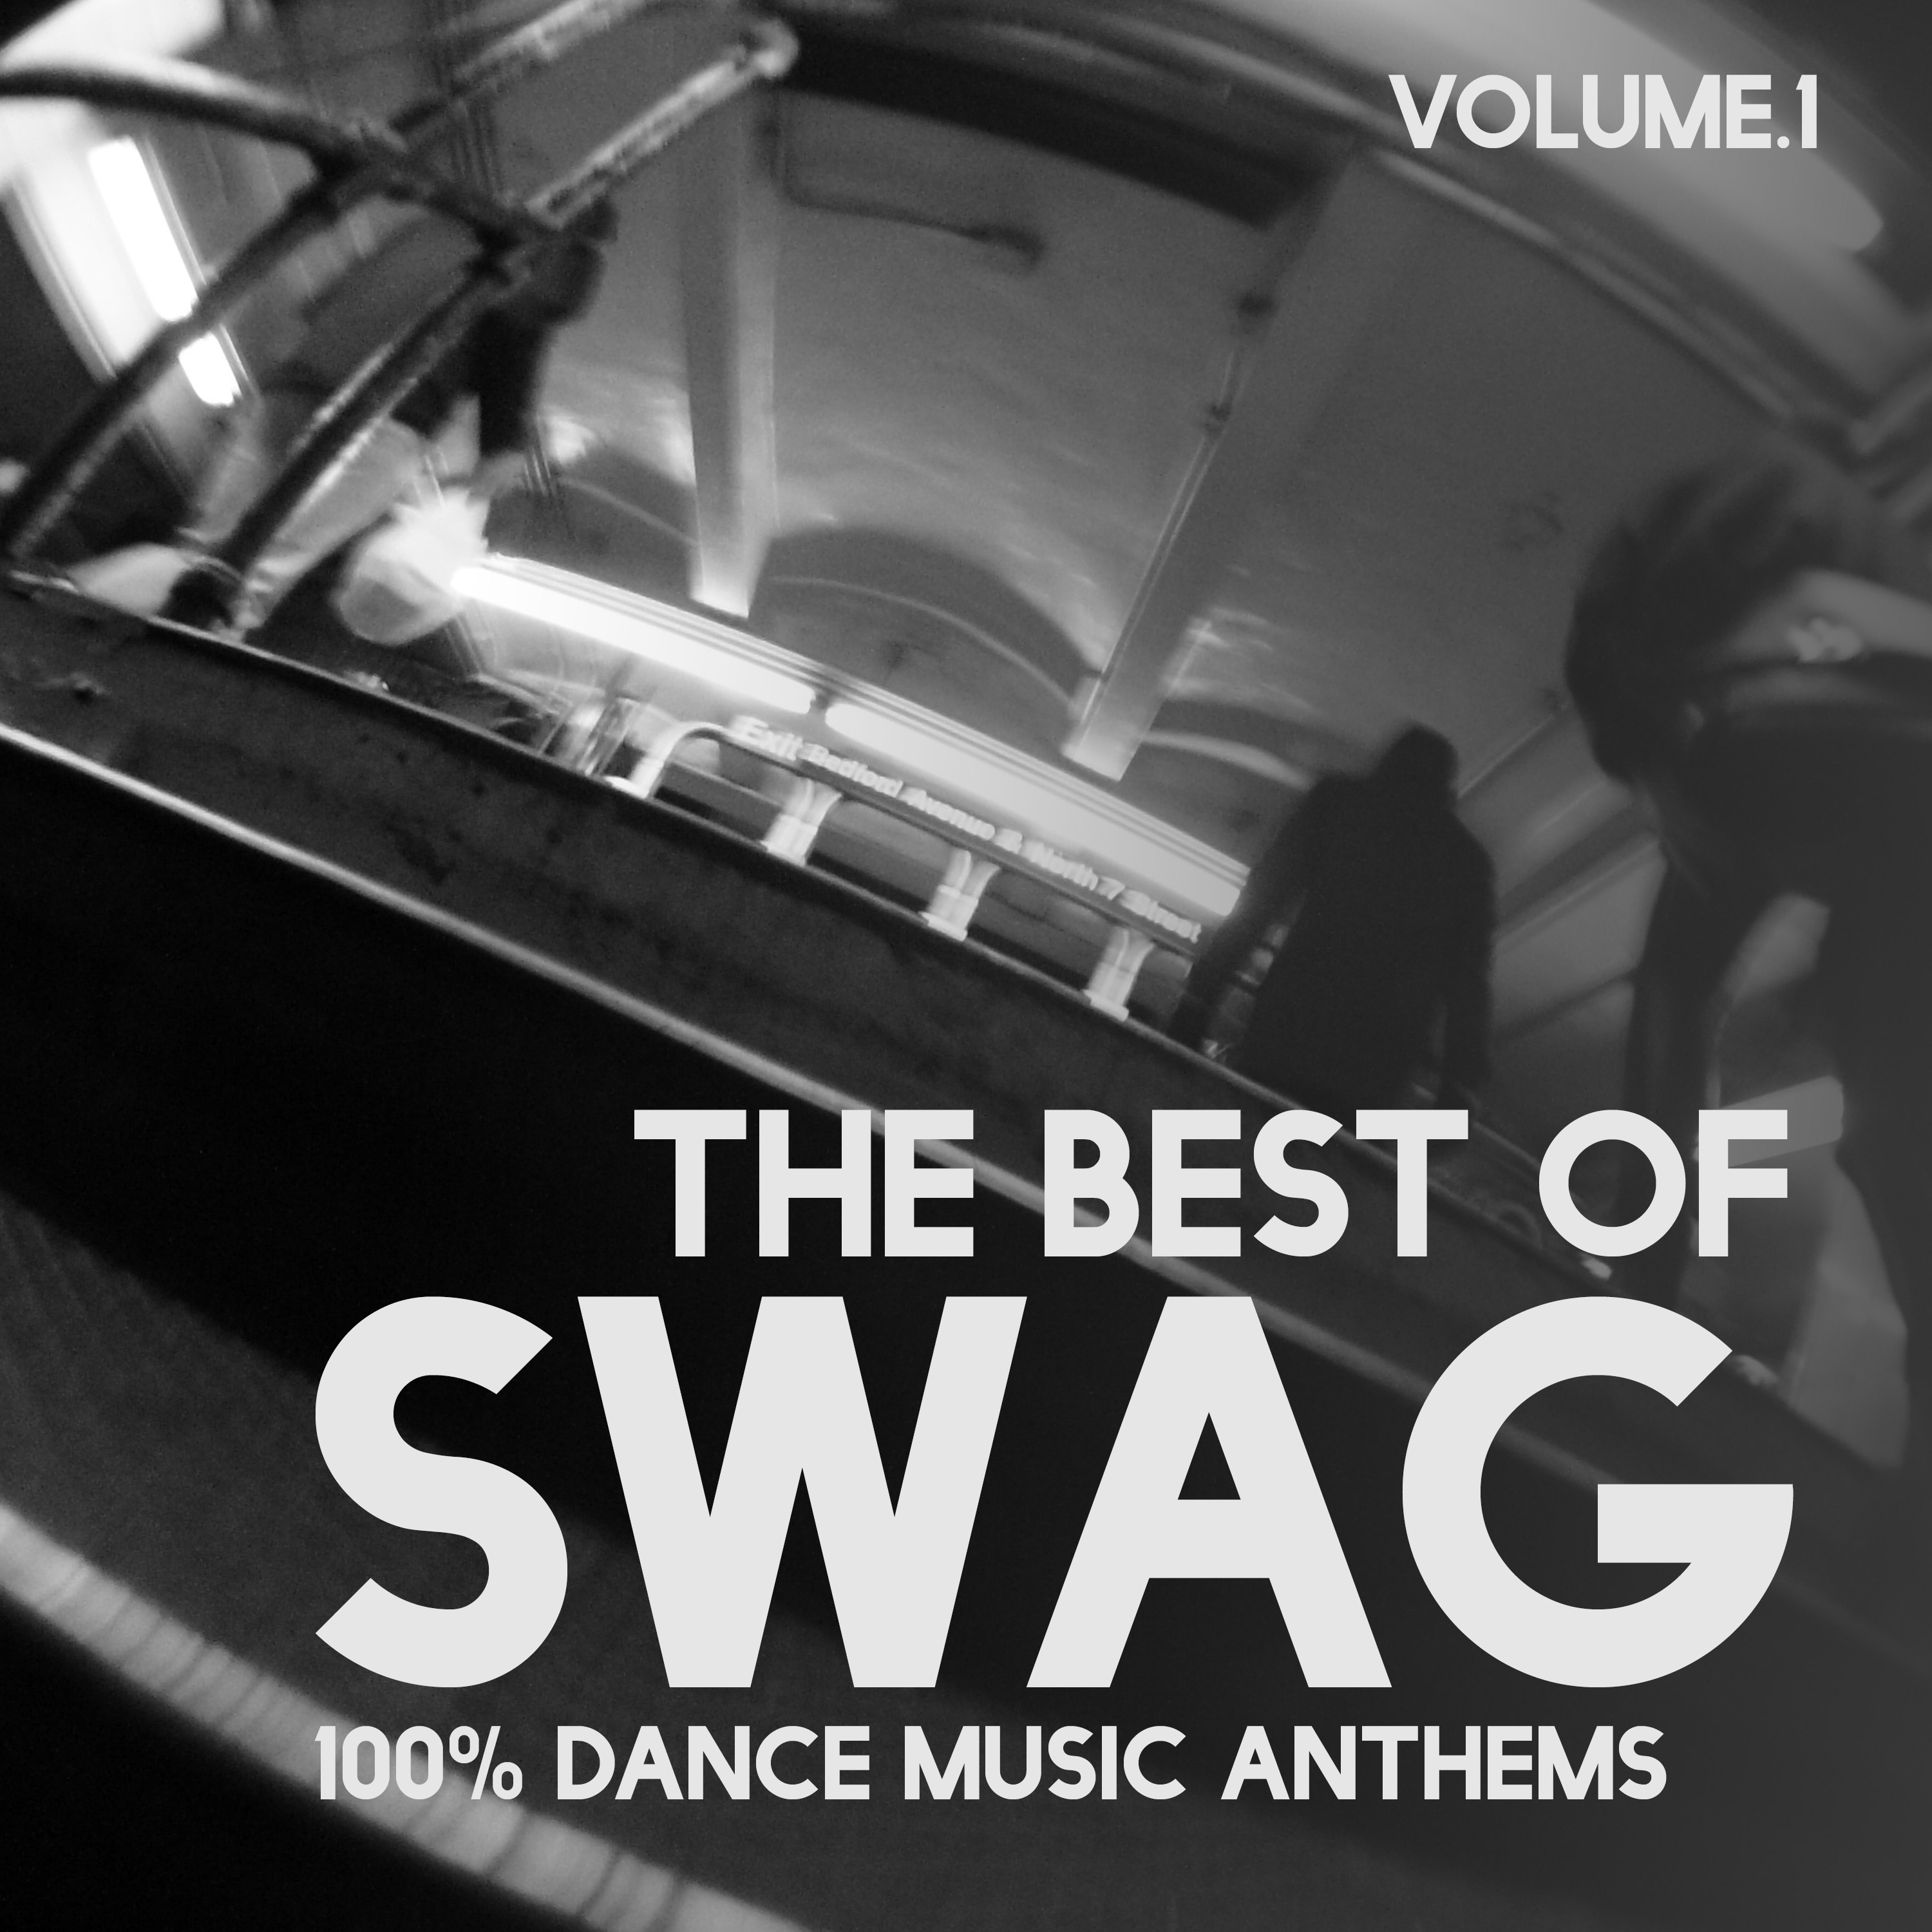 The Best of Swag, Vol. 1 - 100% Dance Music Anthems